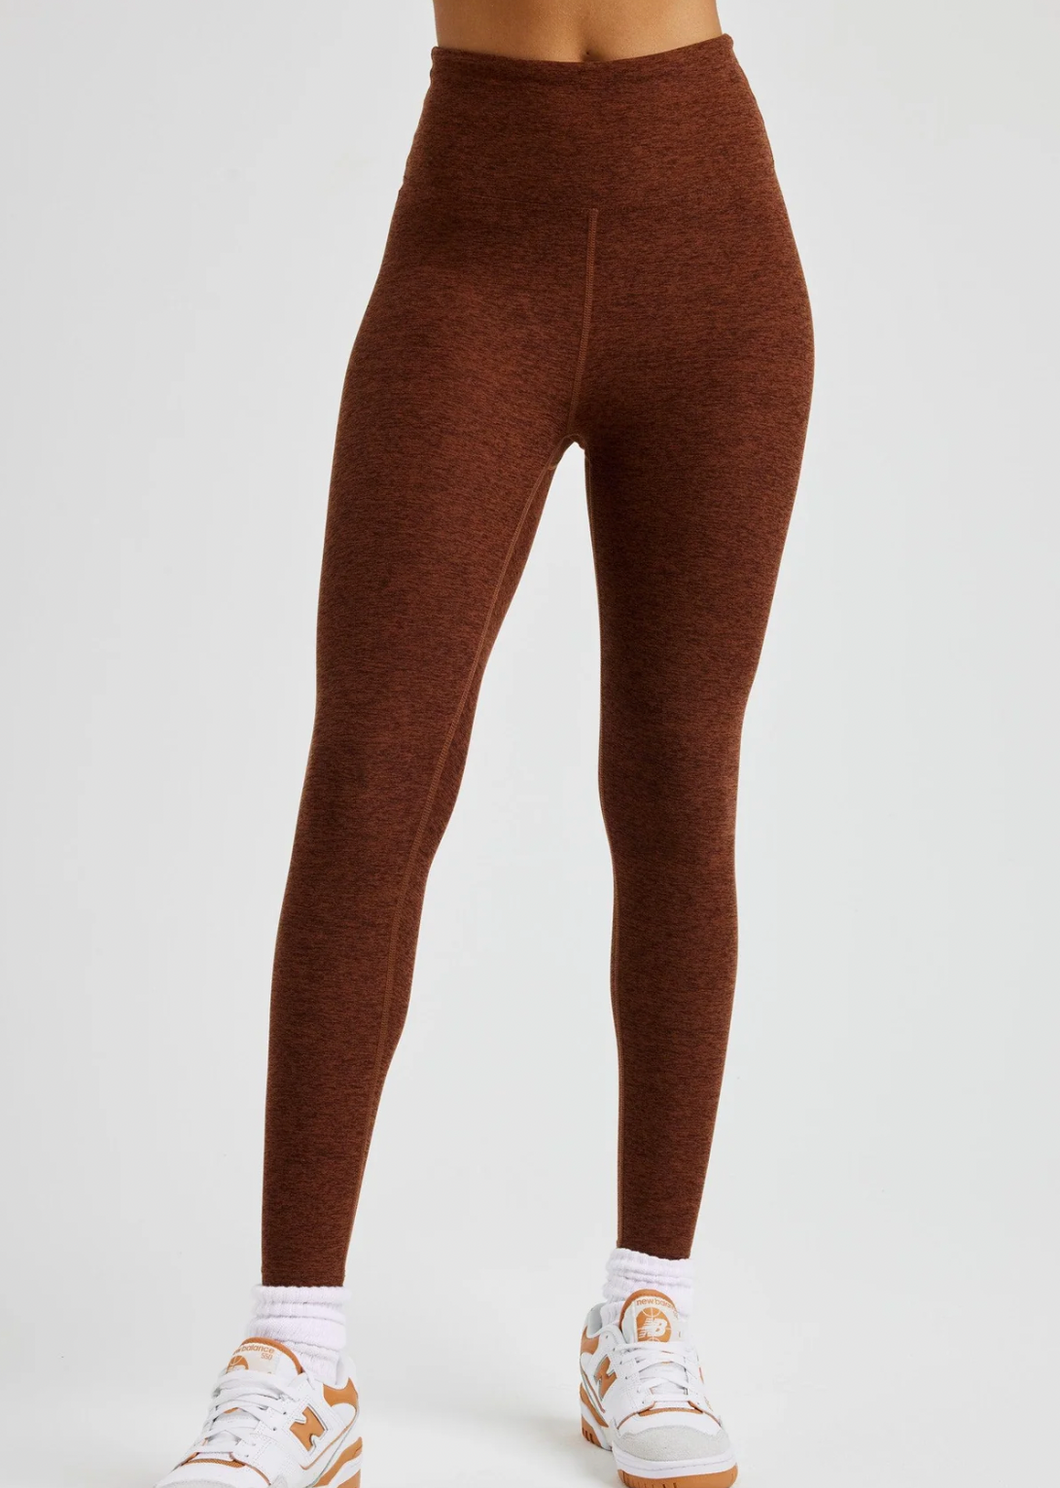 Year of Ours Stretch Sculpt High Legging - Bronze